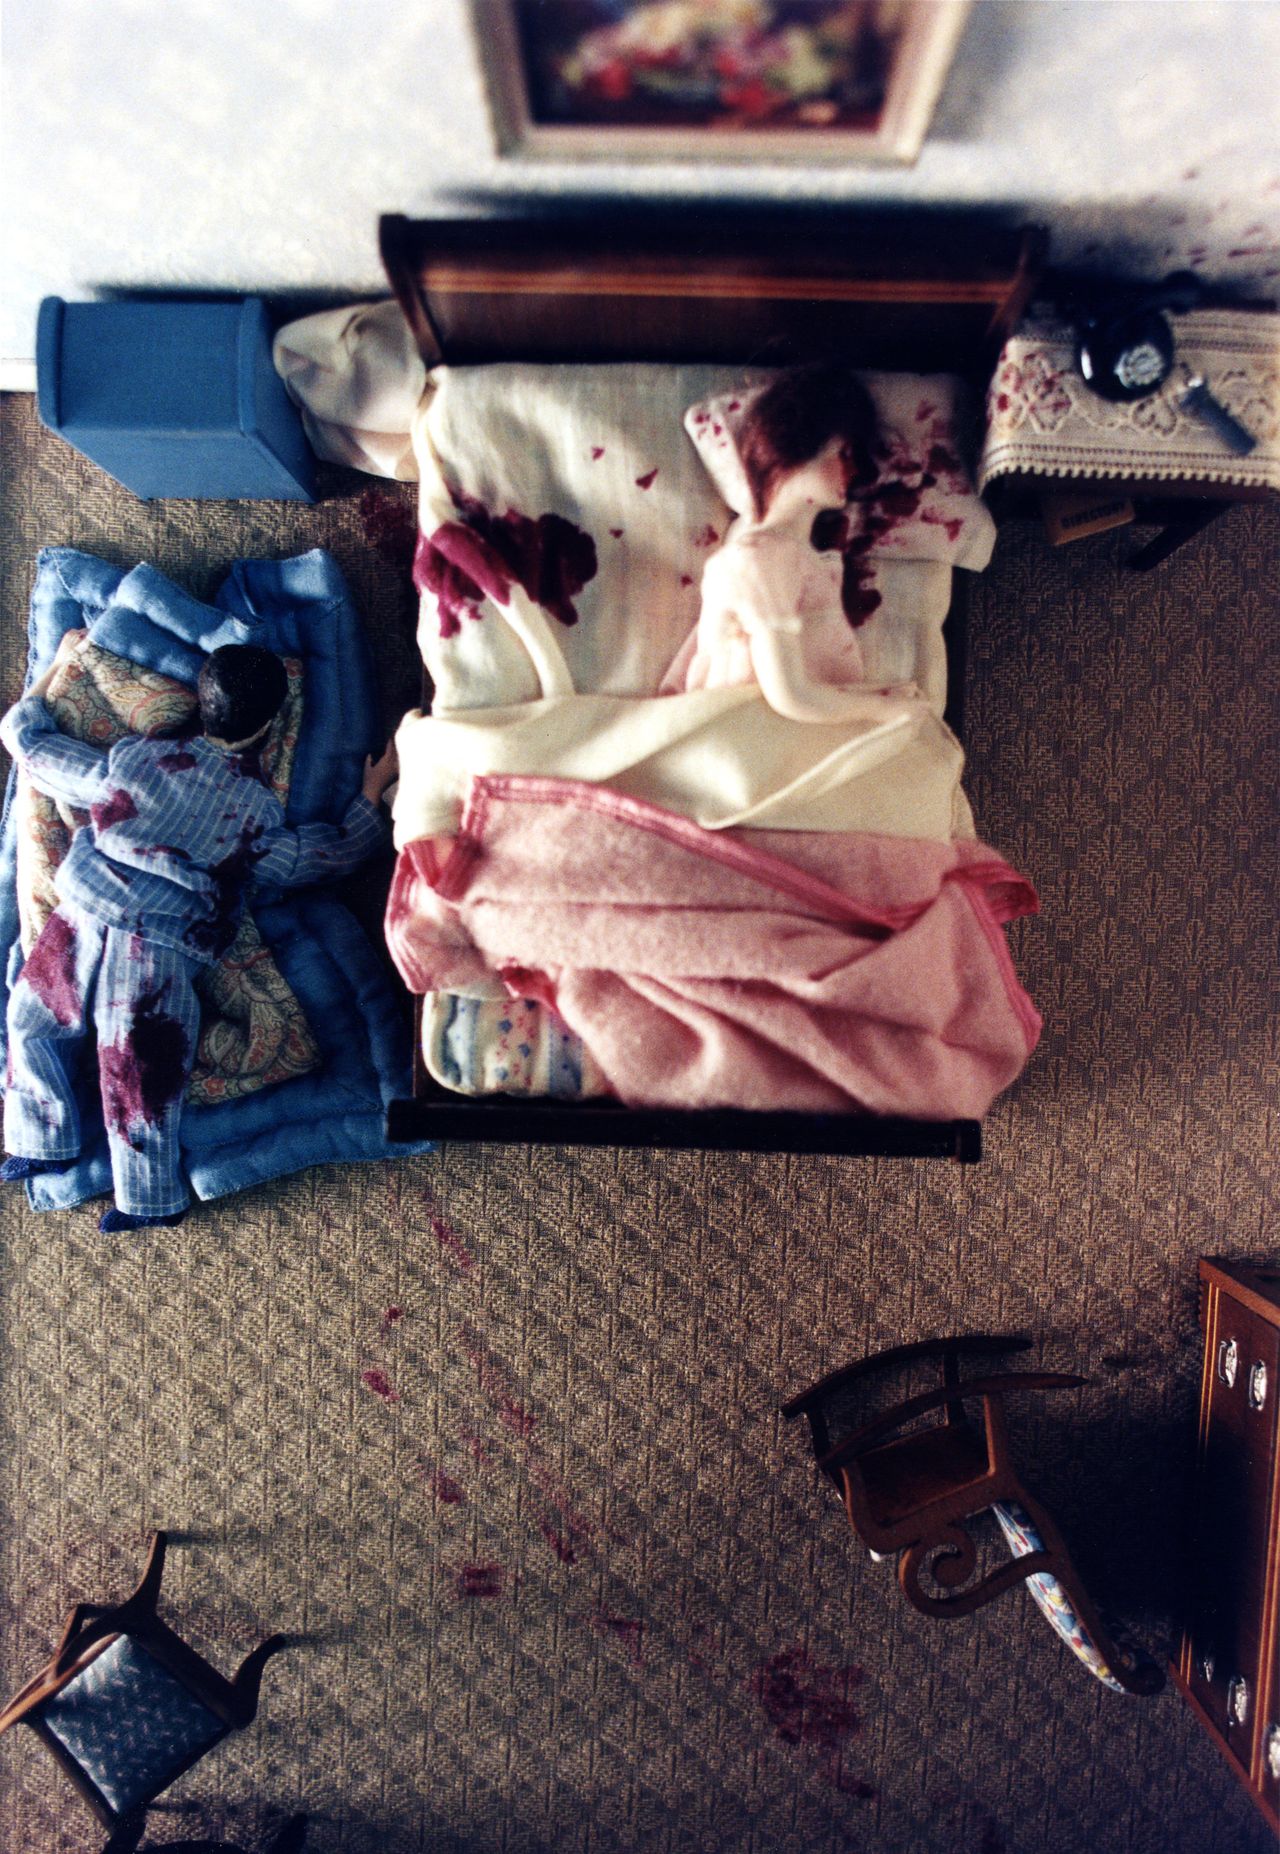 In "Three-Room Dwelling" a wife, husband and baby are all shot to death.